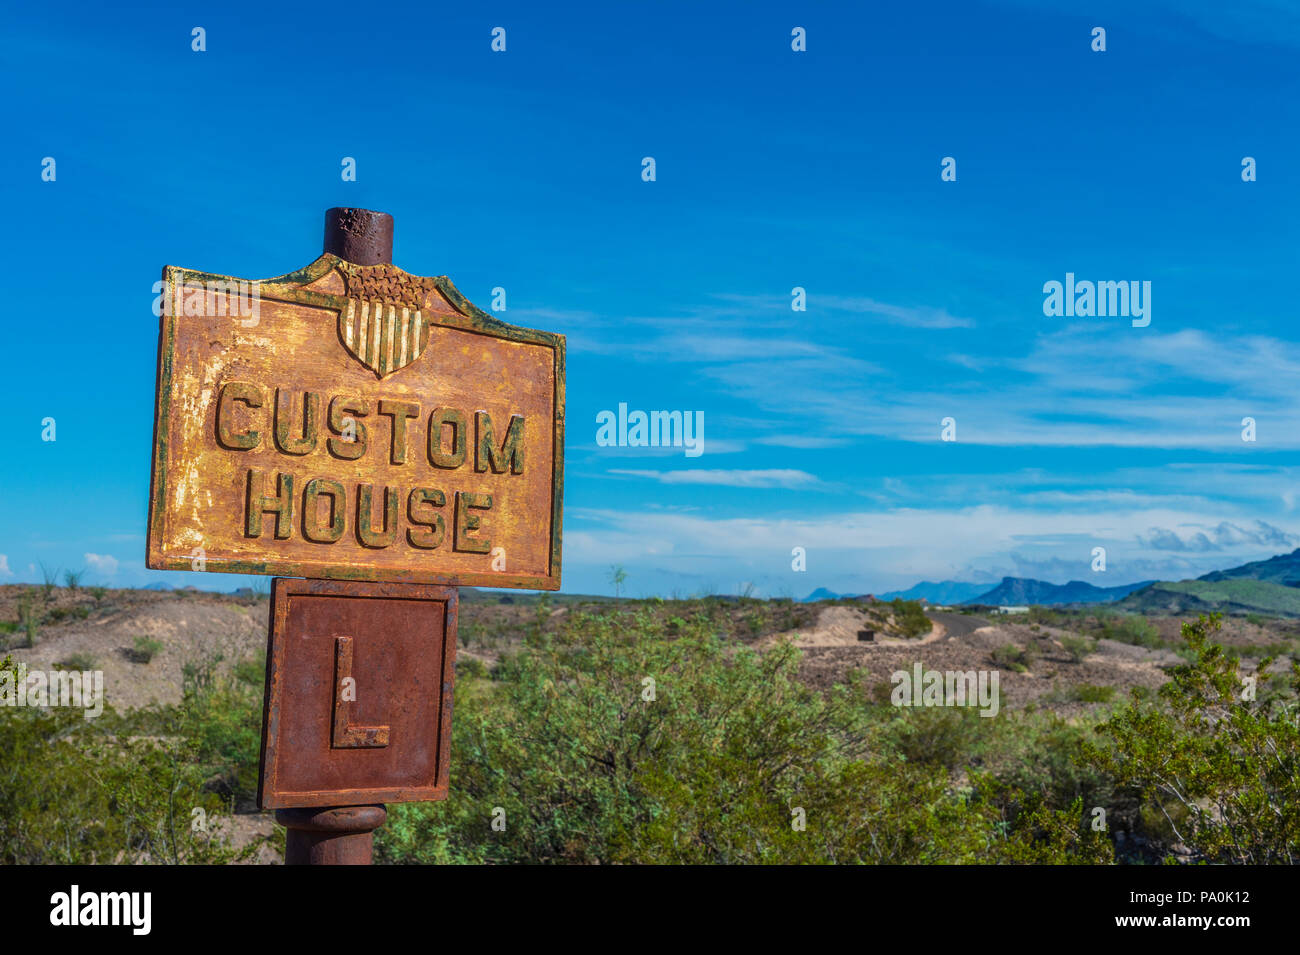 Customs House sign at Castolon Historic District in Big Bend National Park in Texas. Historic border crossing area. Stock Photo